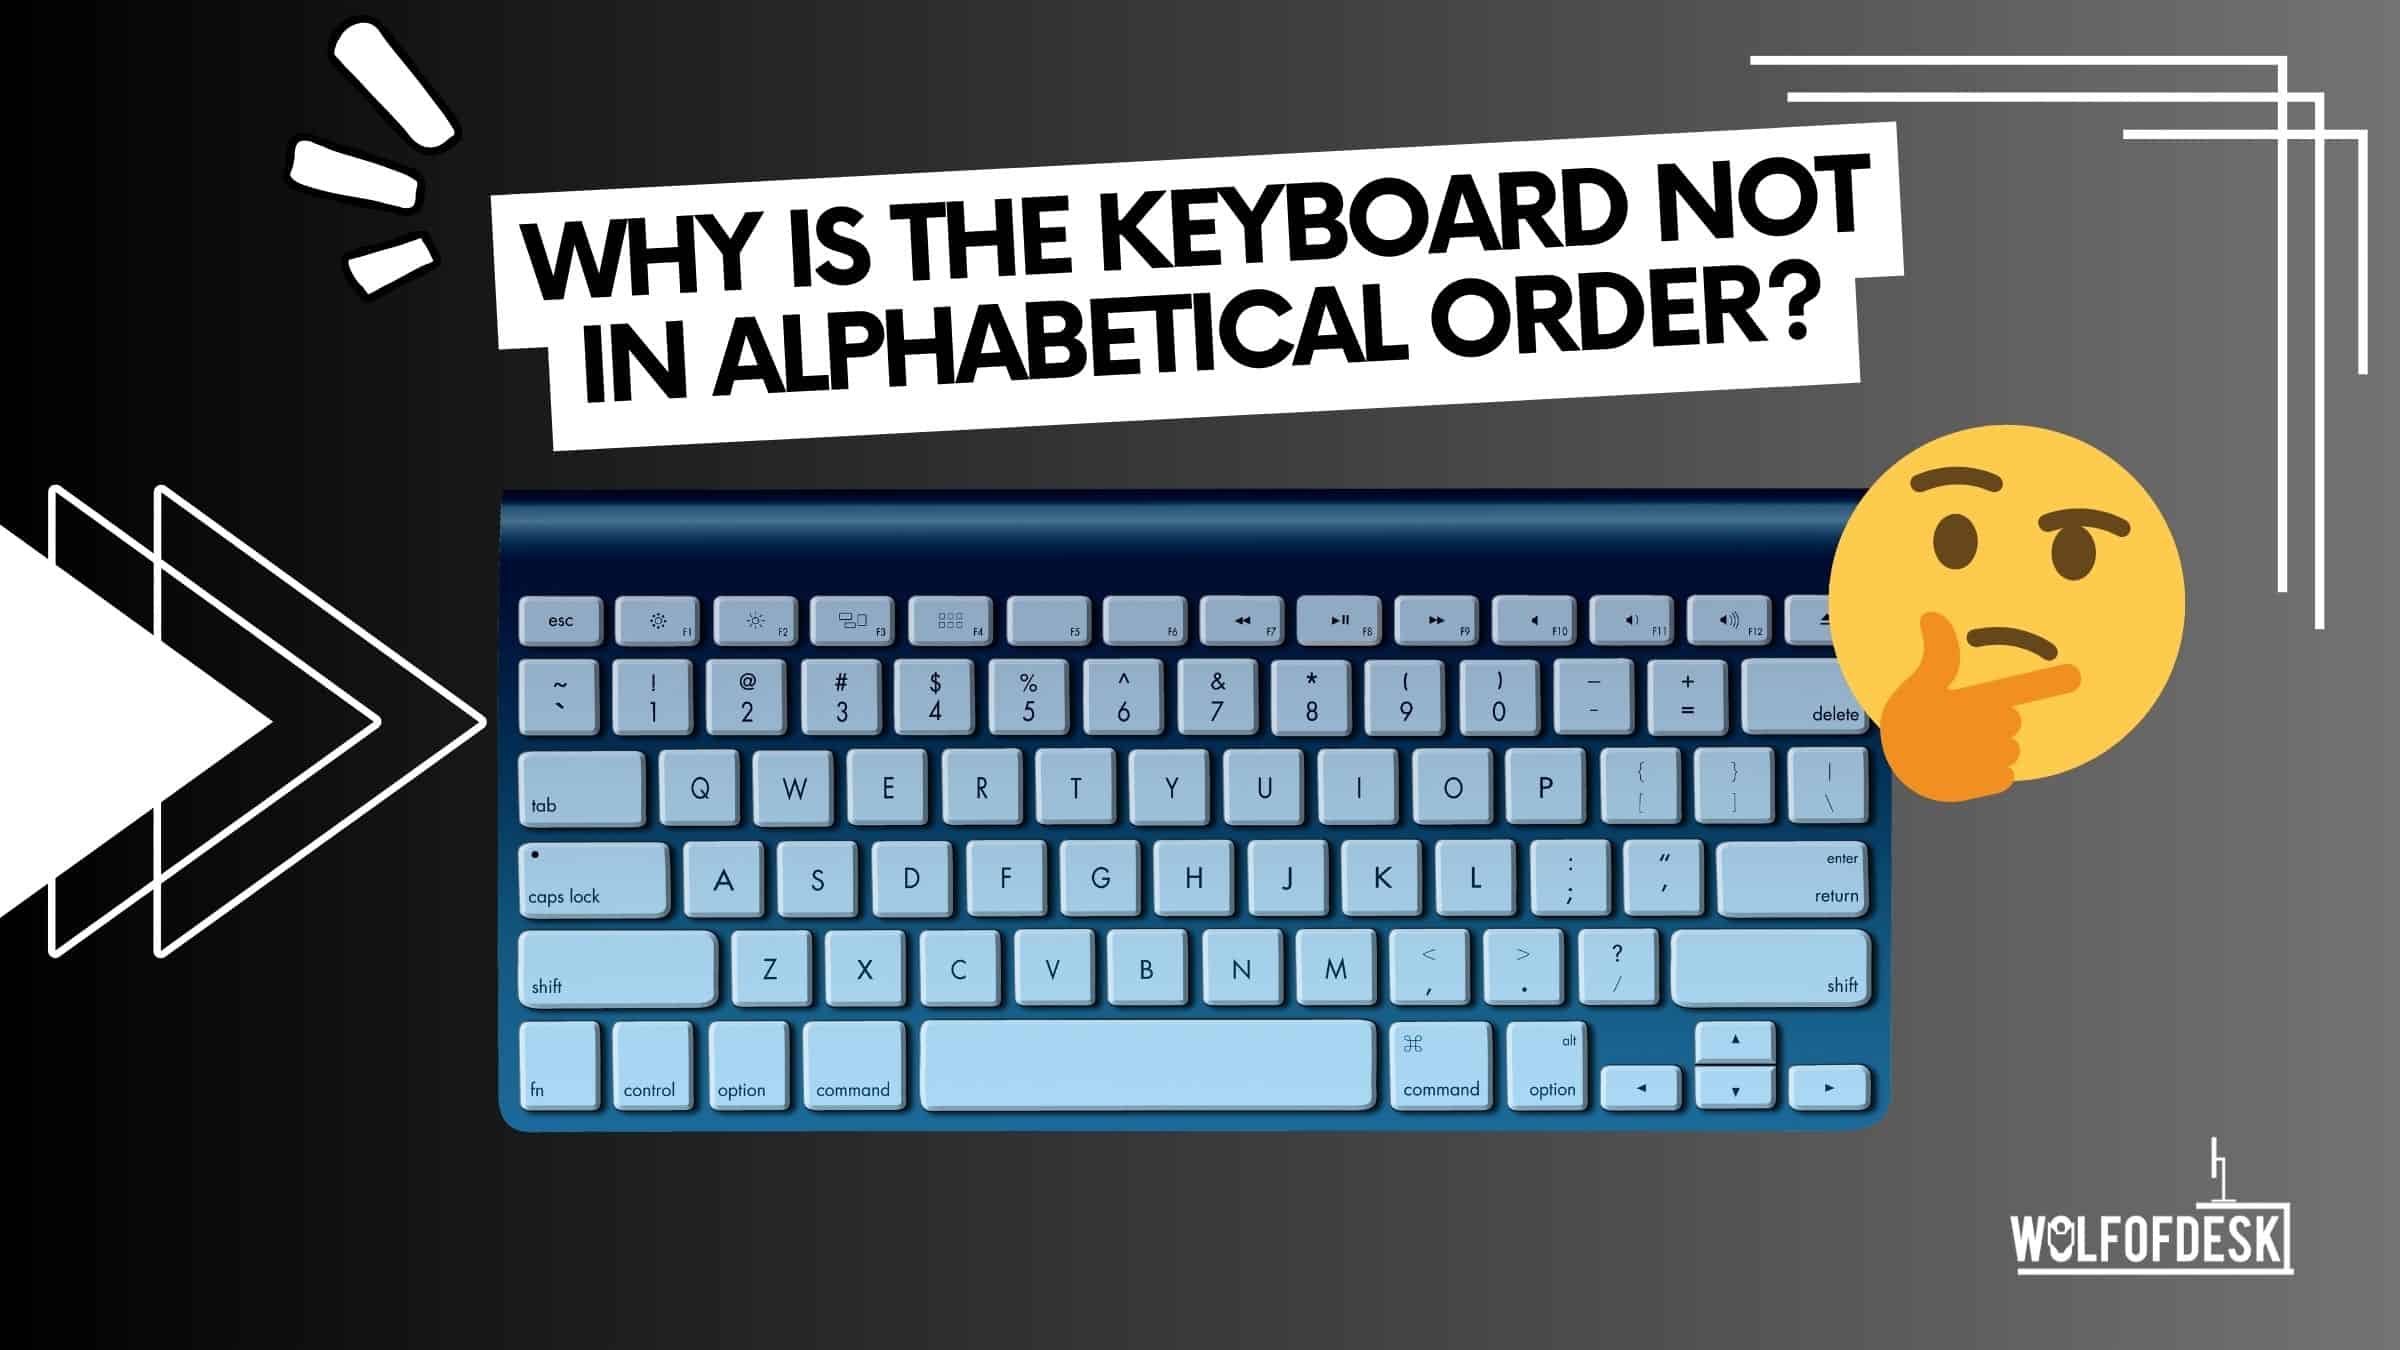 why is the keyboard not in alphabetical order - answered in detail